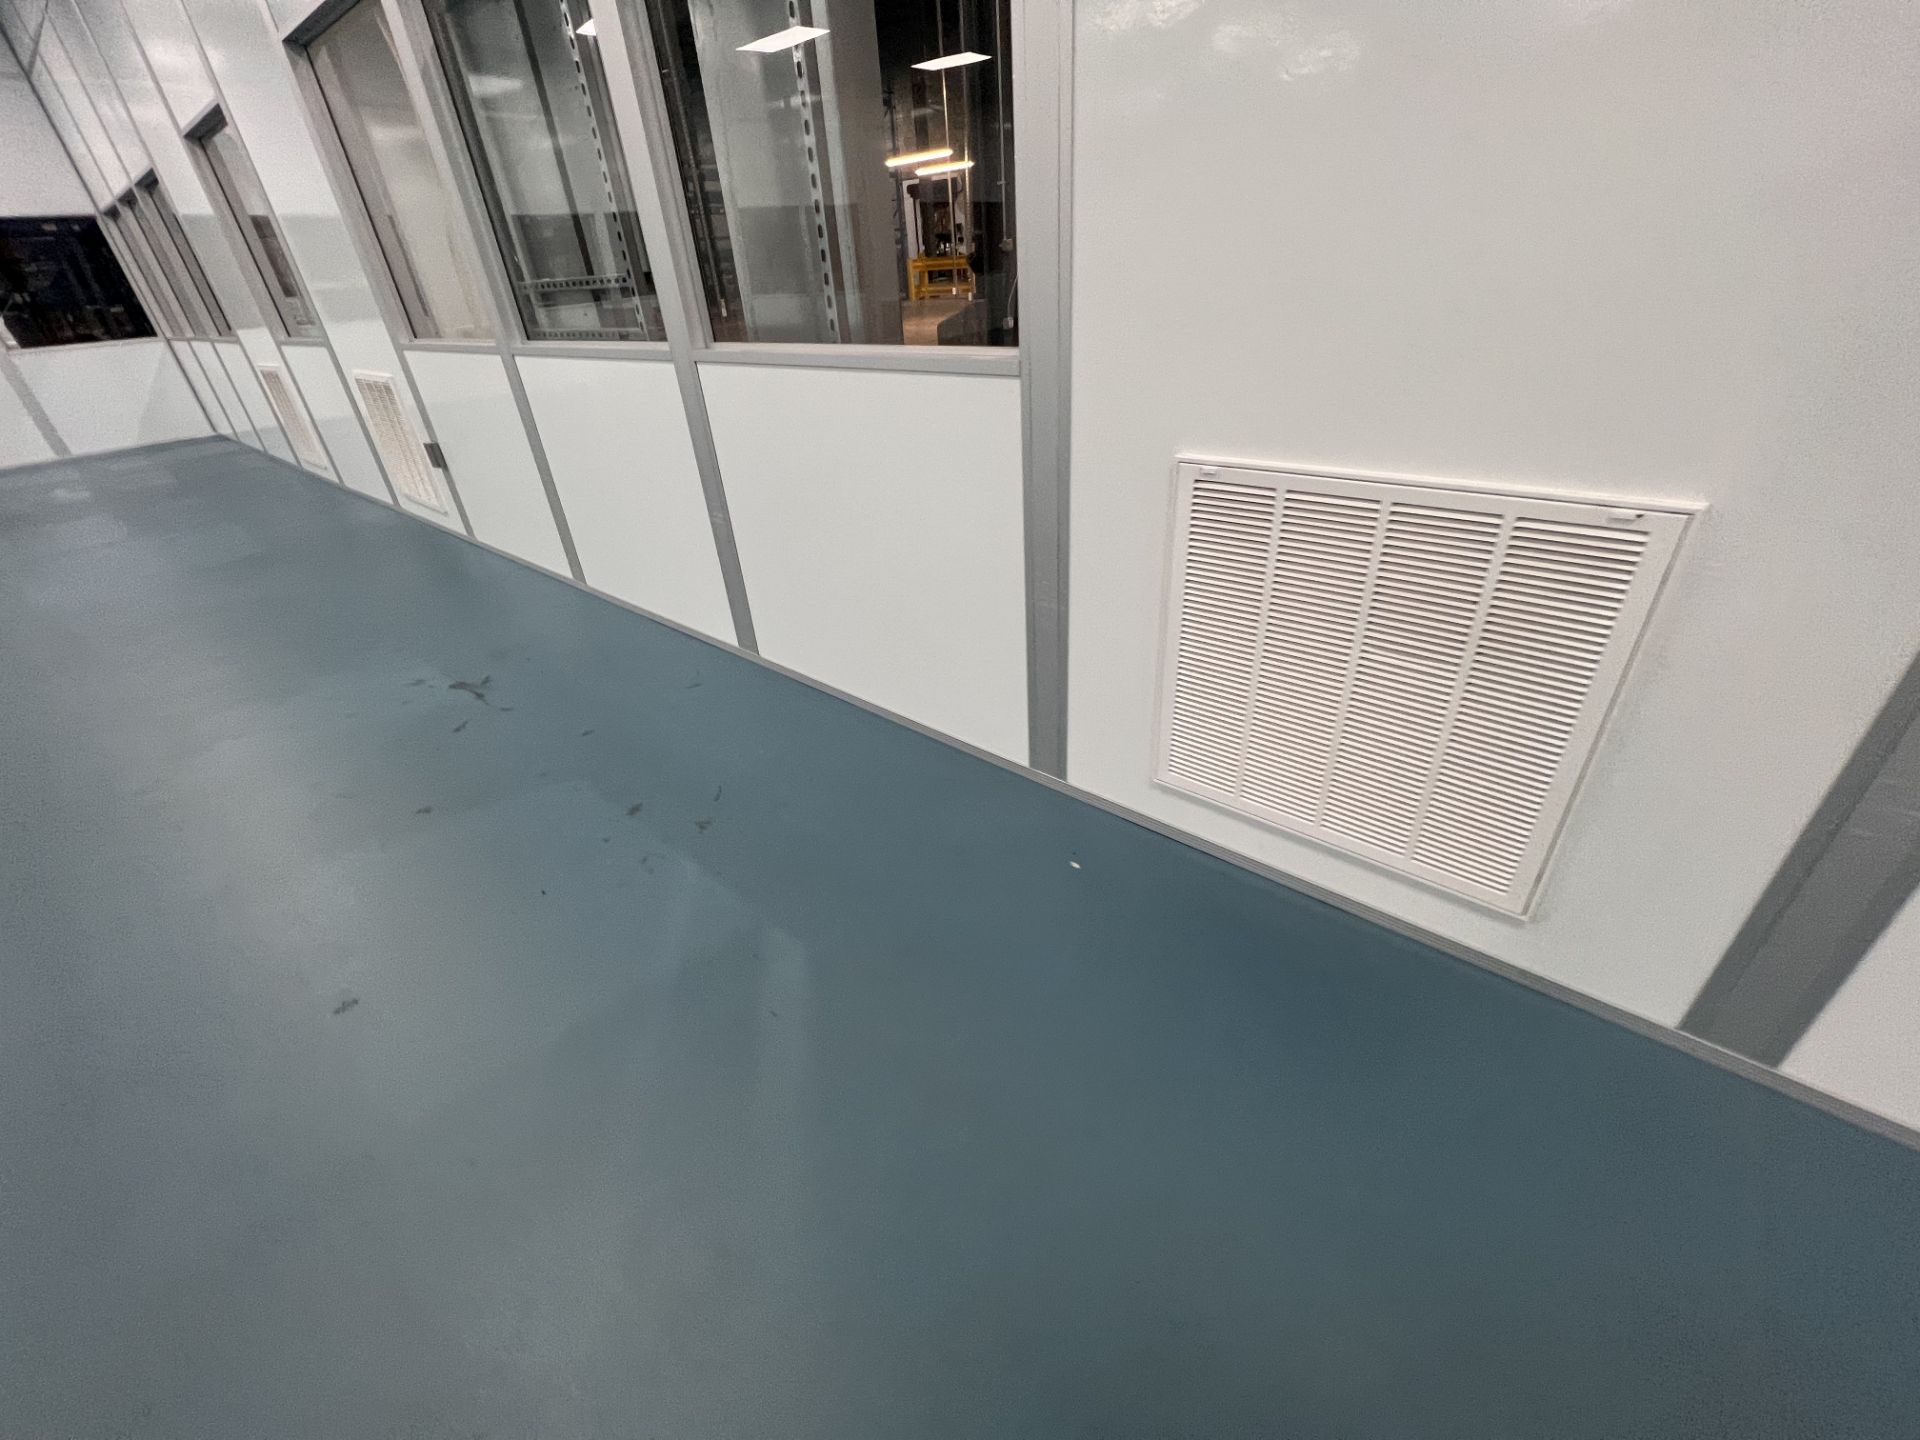 MODULAR CLEAN ROOM, APPROX. 60 FT X 60 FT X 11 FT 10 IN, INCLUDES HEPA FILTRATION UNITS - Image 24 of 34